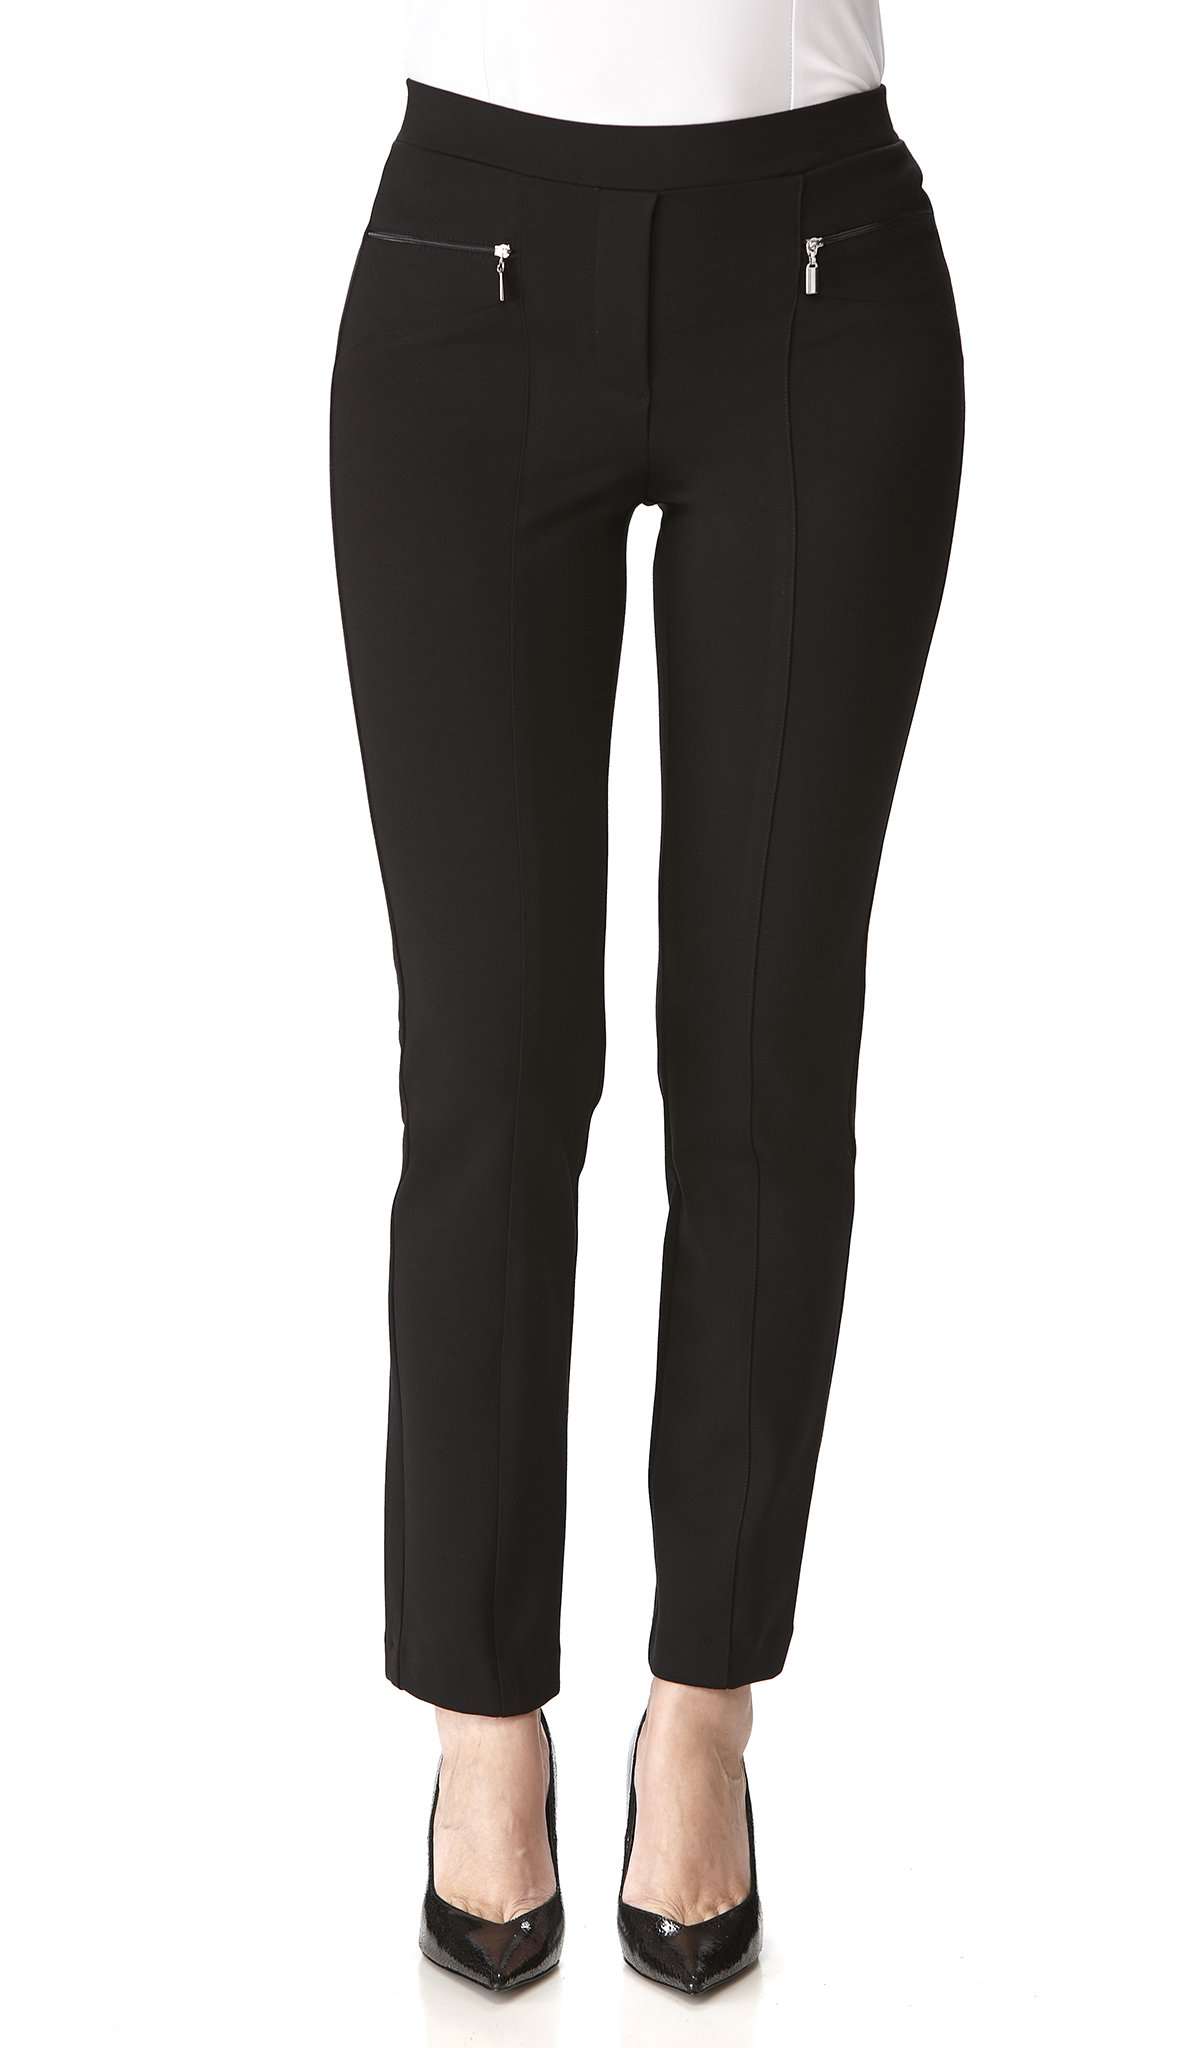 Women's Pants Black Quality Stretch Fabric Built for Comfort Our Best Selling Pant Made in Canada - Yvonne Marie - Yvonne Marie